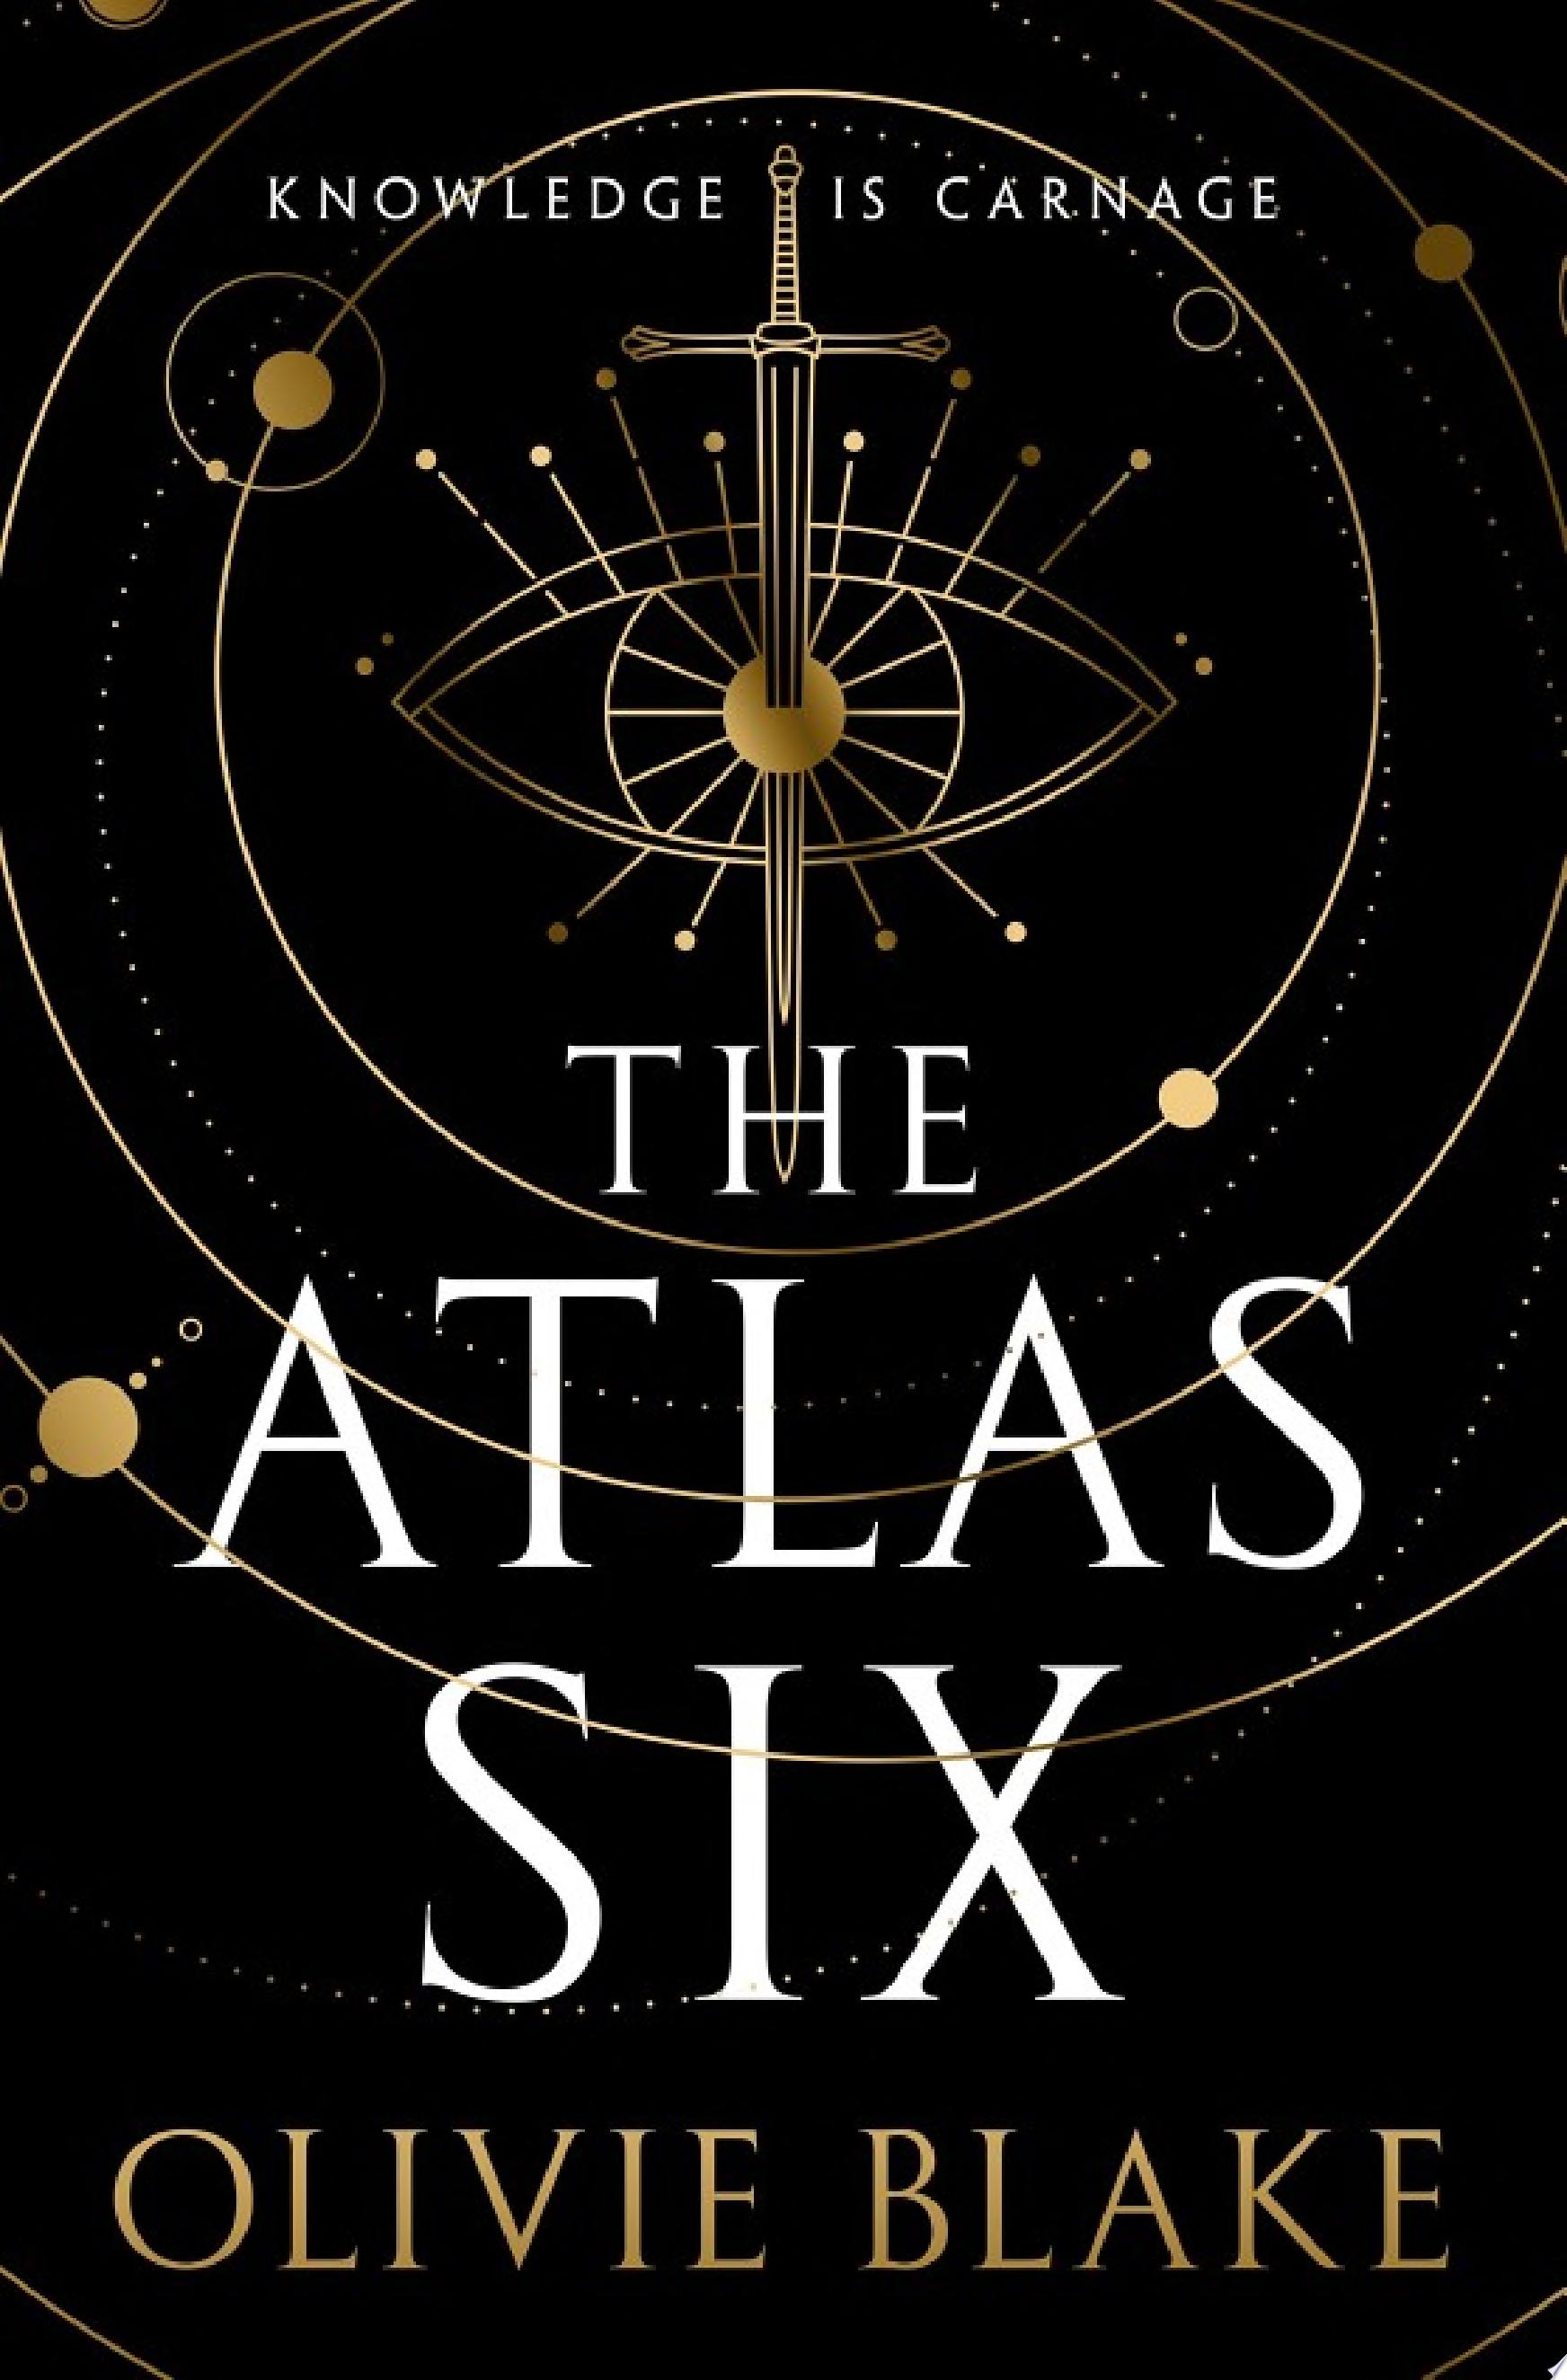 Image for "The Atlas Six"